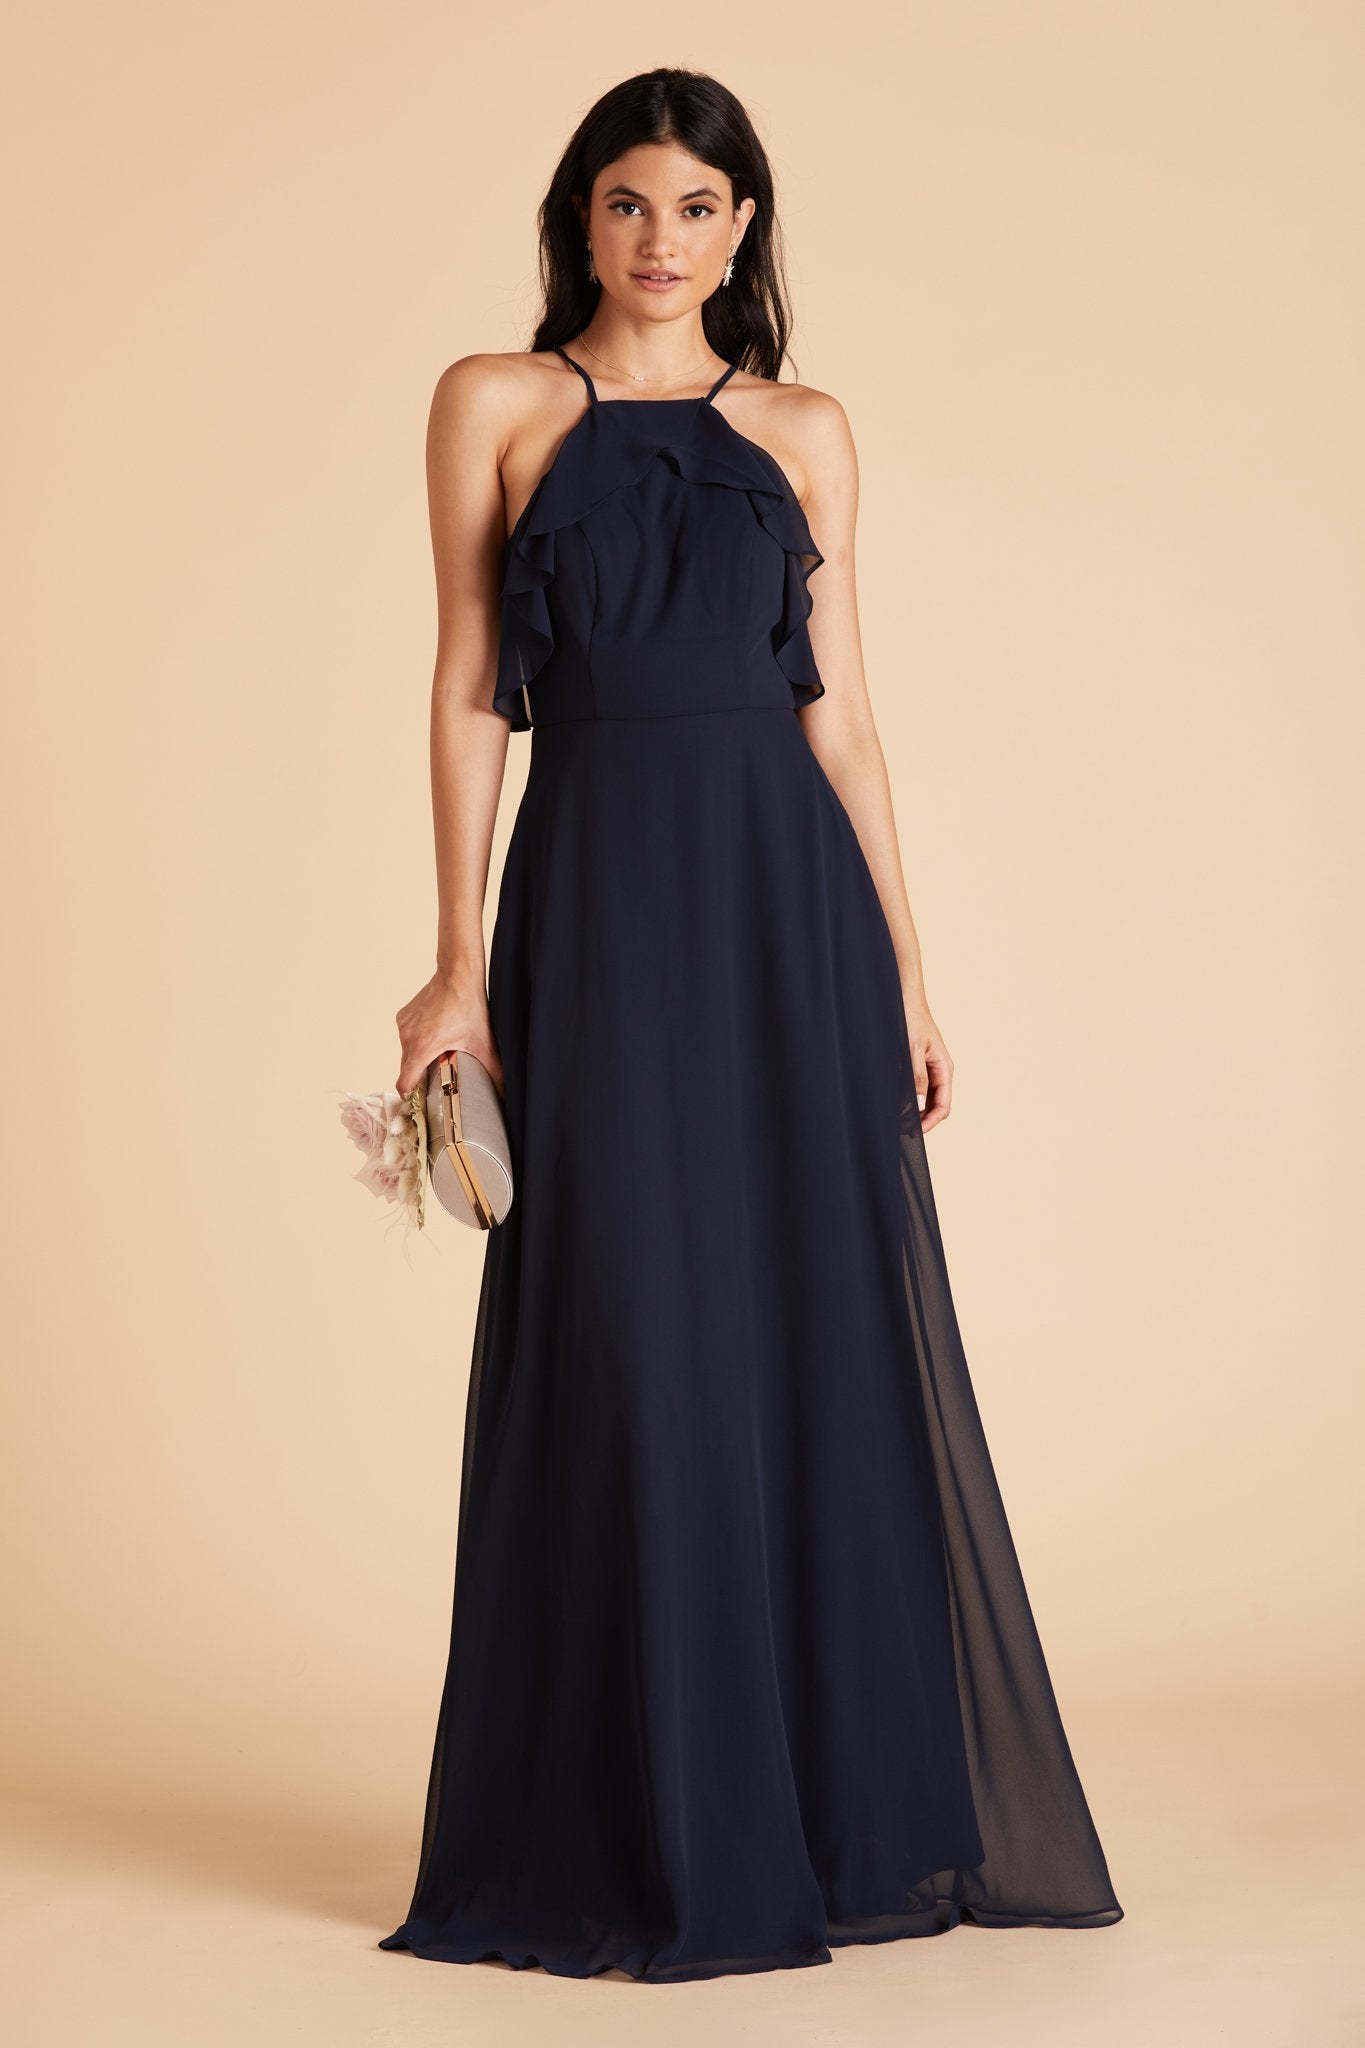 Jules bridesmaid dress in navy blue chiffon by Birdy Grey, front view